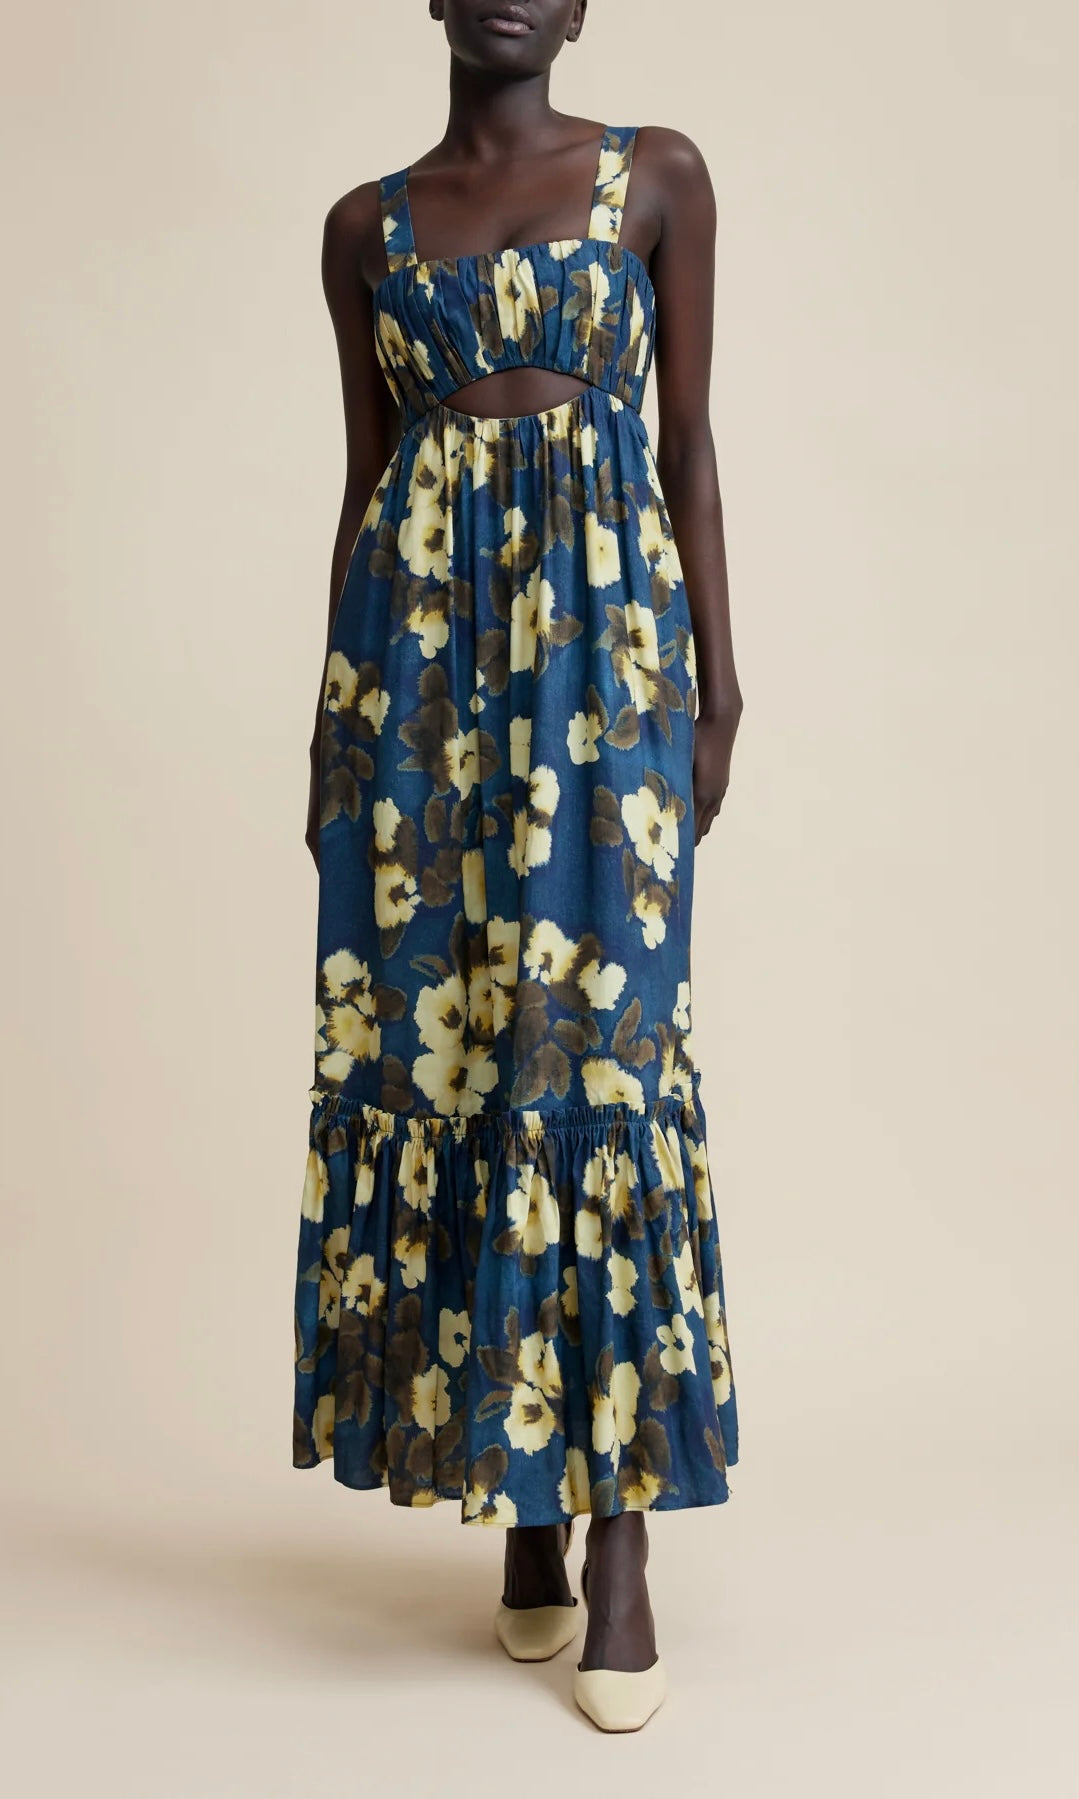 Acler Luddenham Dress In Floral Posy Print